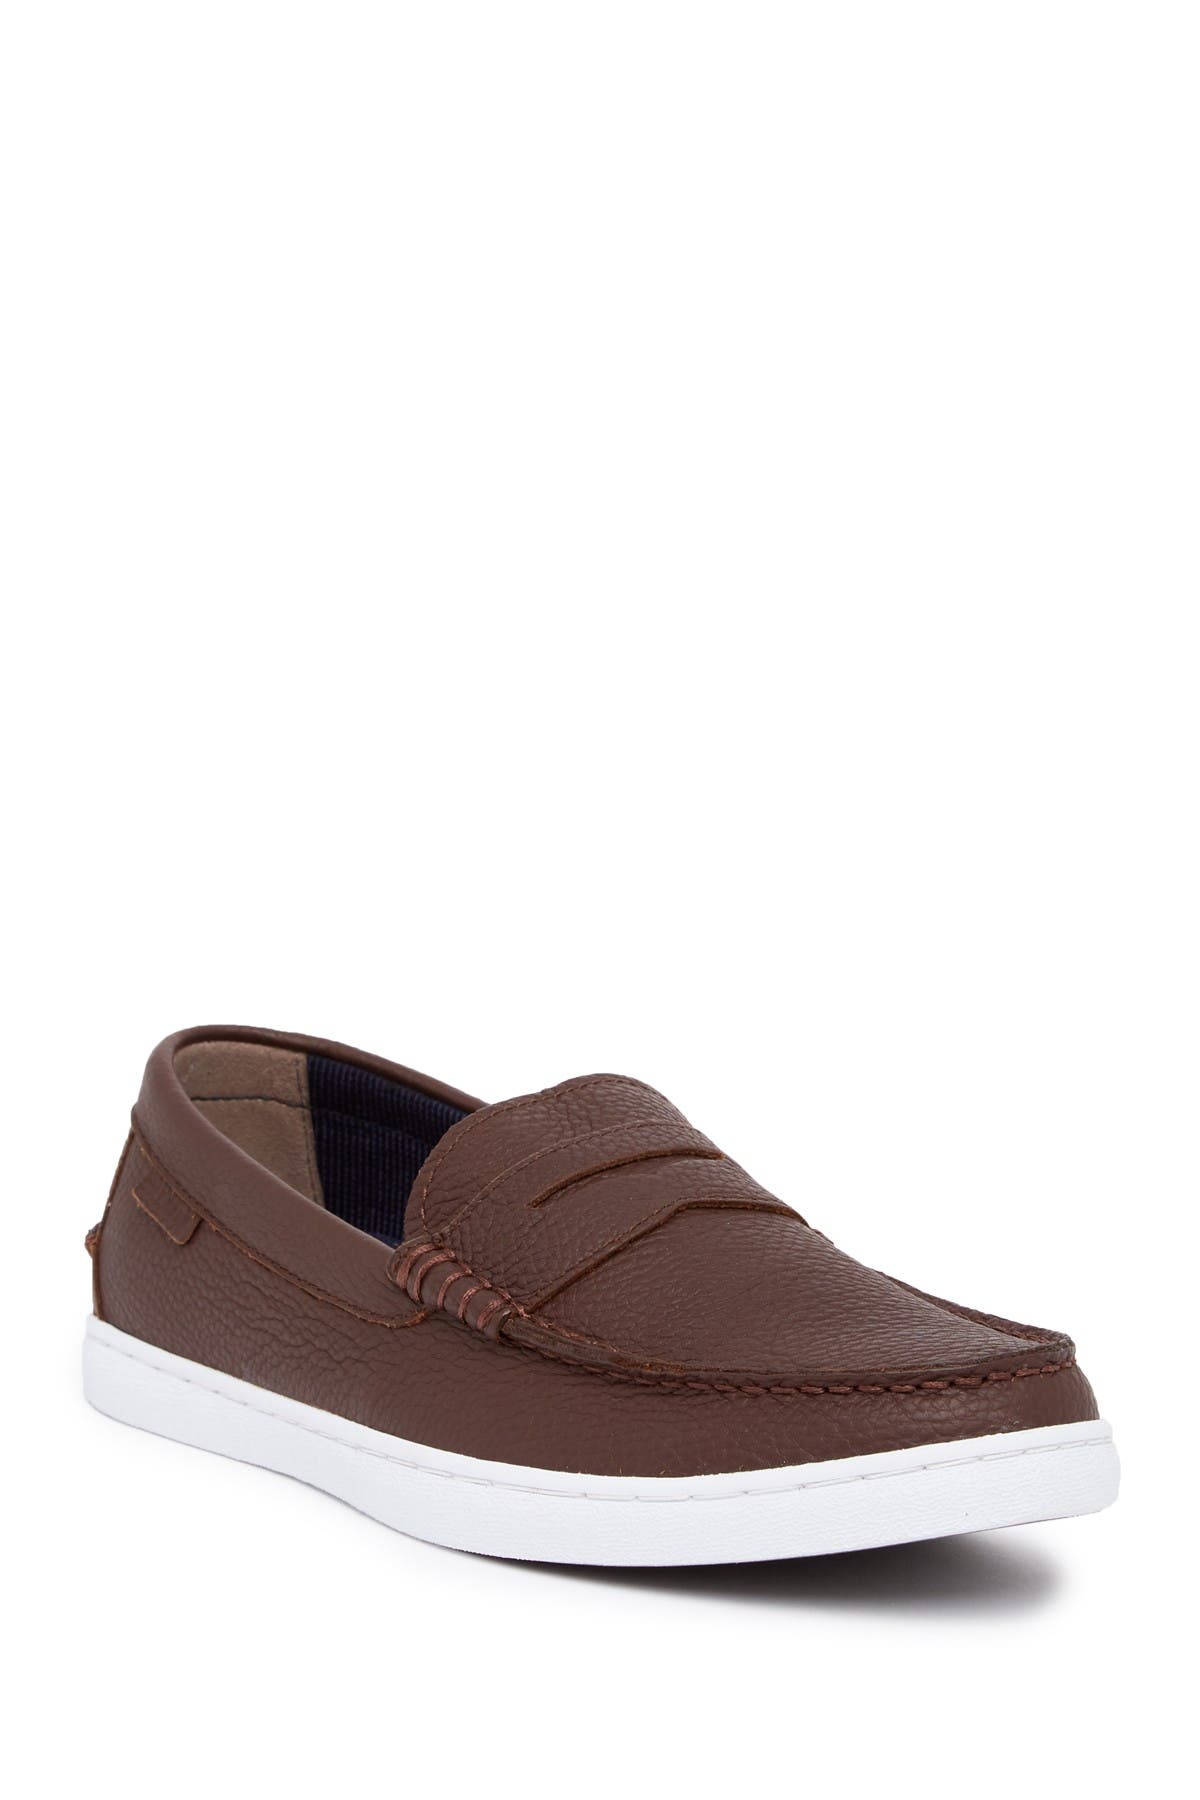 cole haan go to loafer